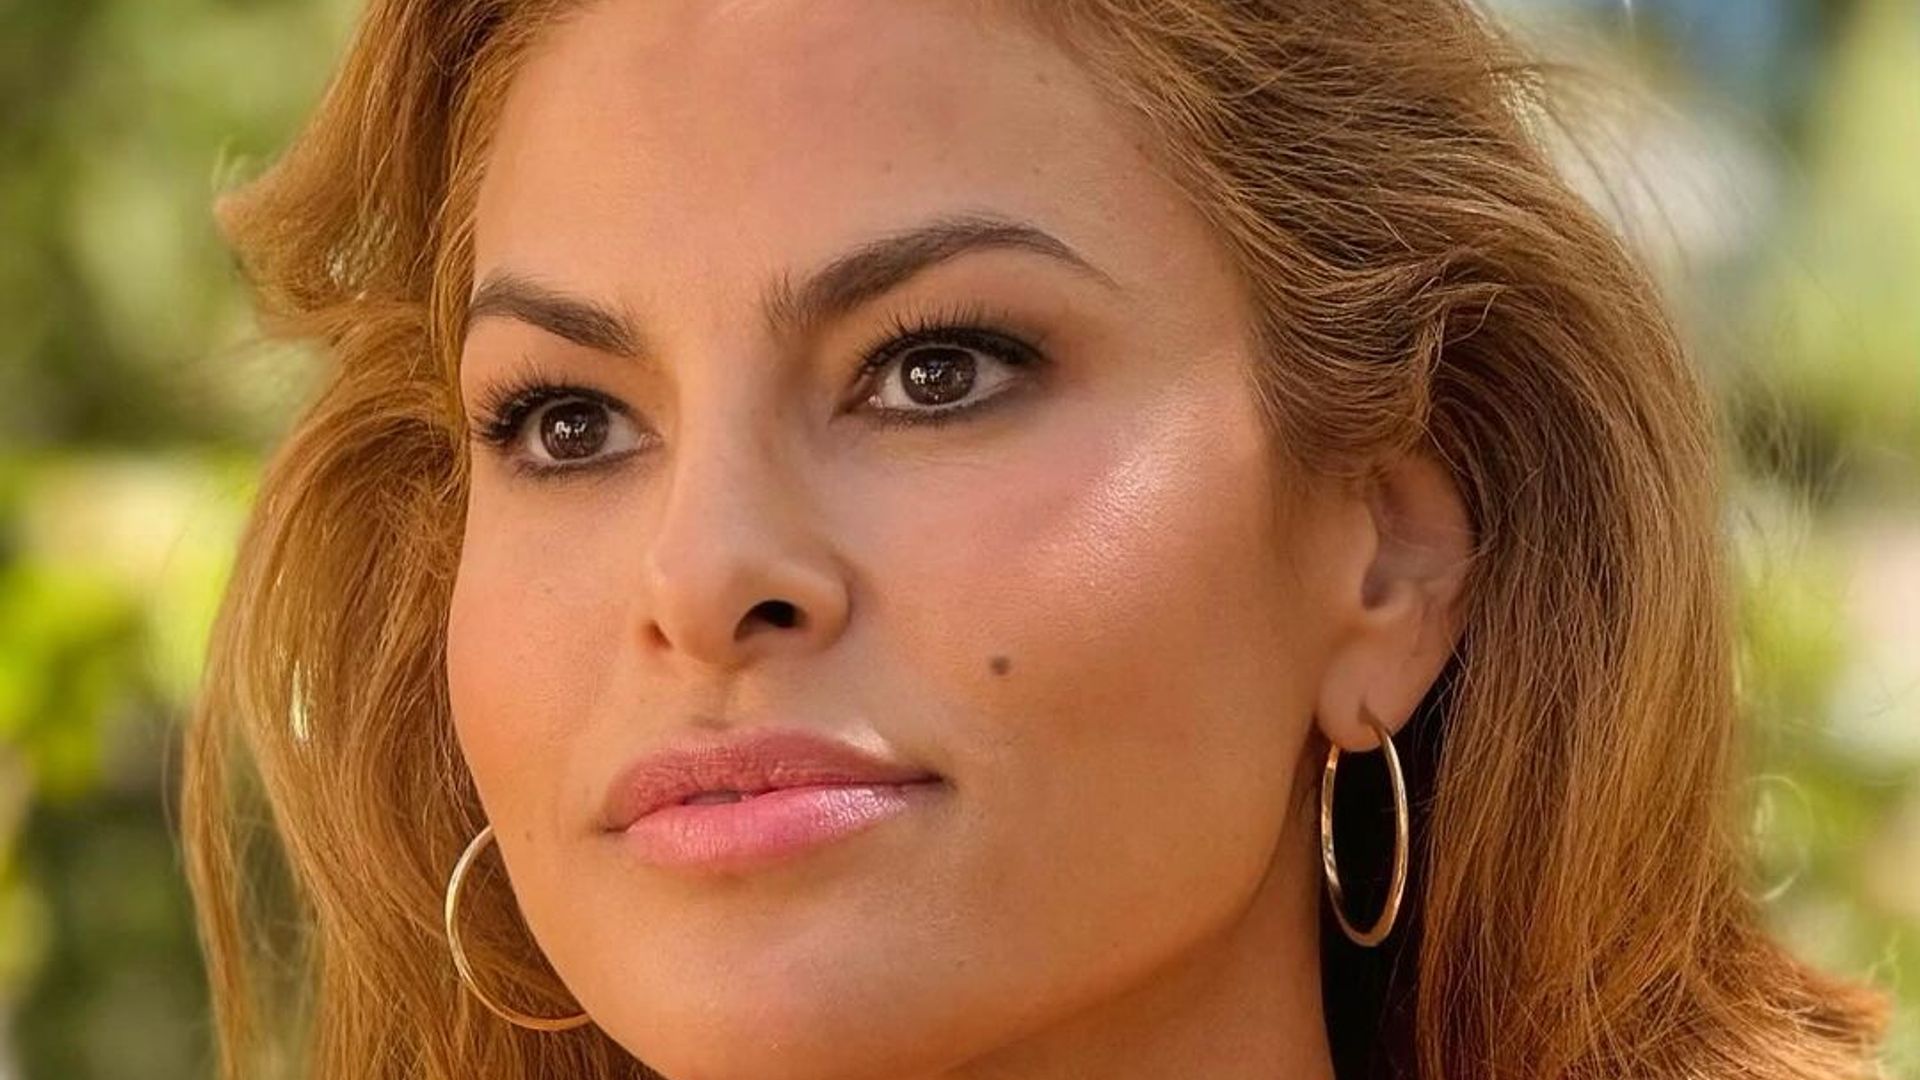 Eva Mendes looked solemn in her latest post